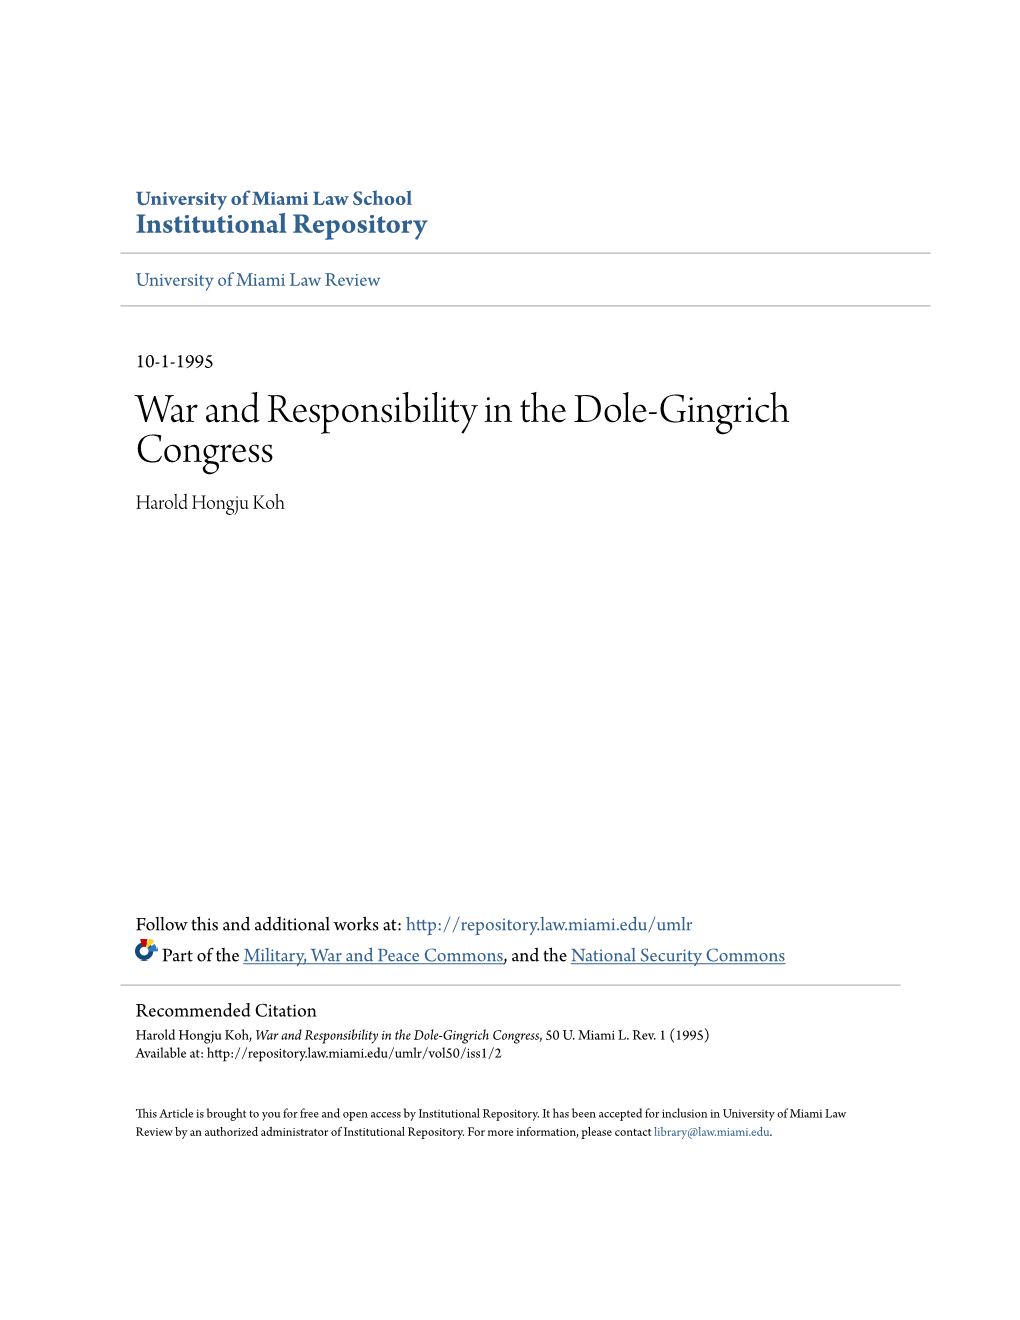 War and Responsibility in the Dole-Gingrich Congress Harold Hongju Koh